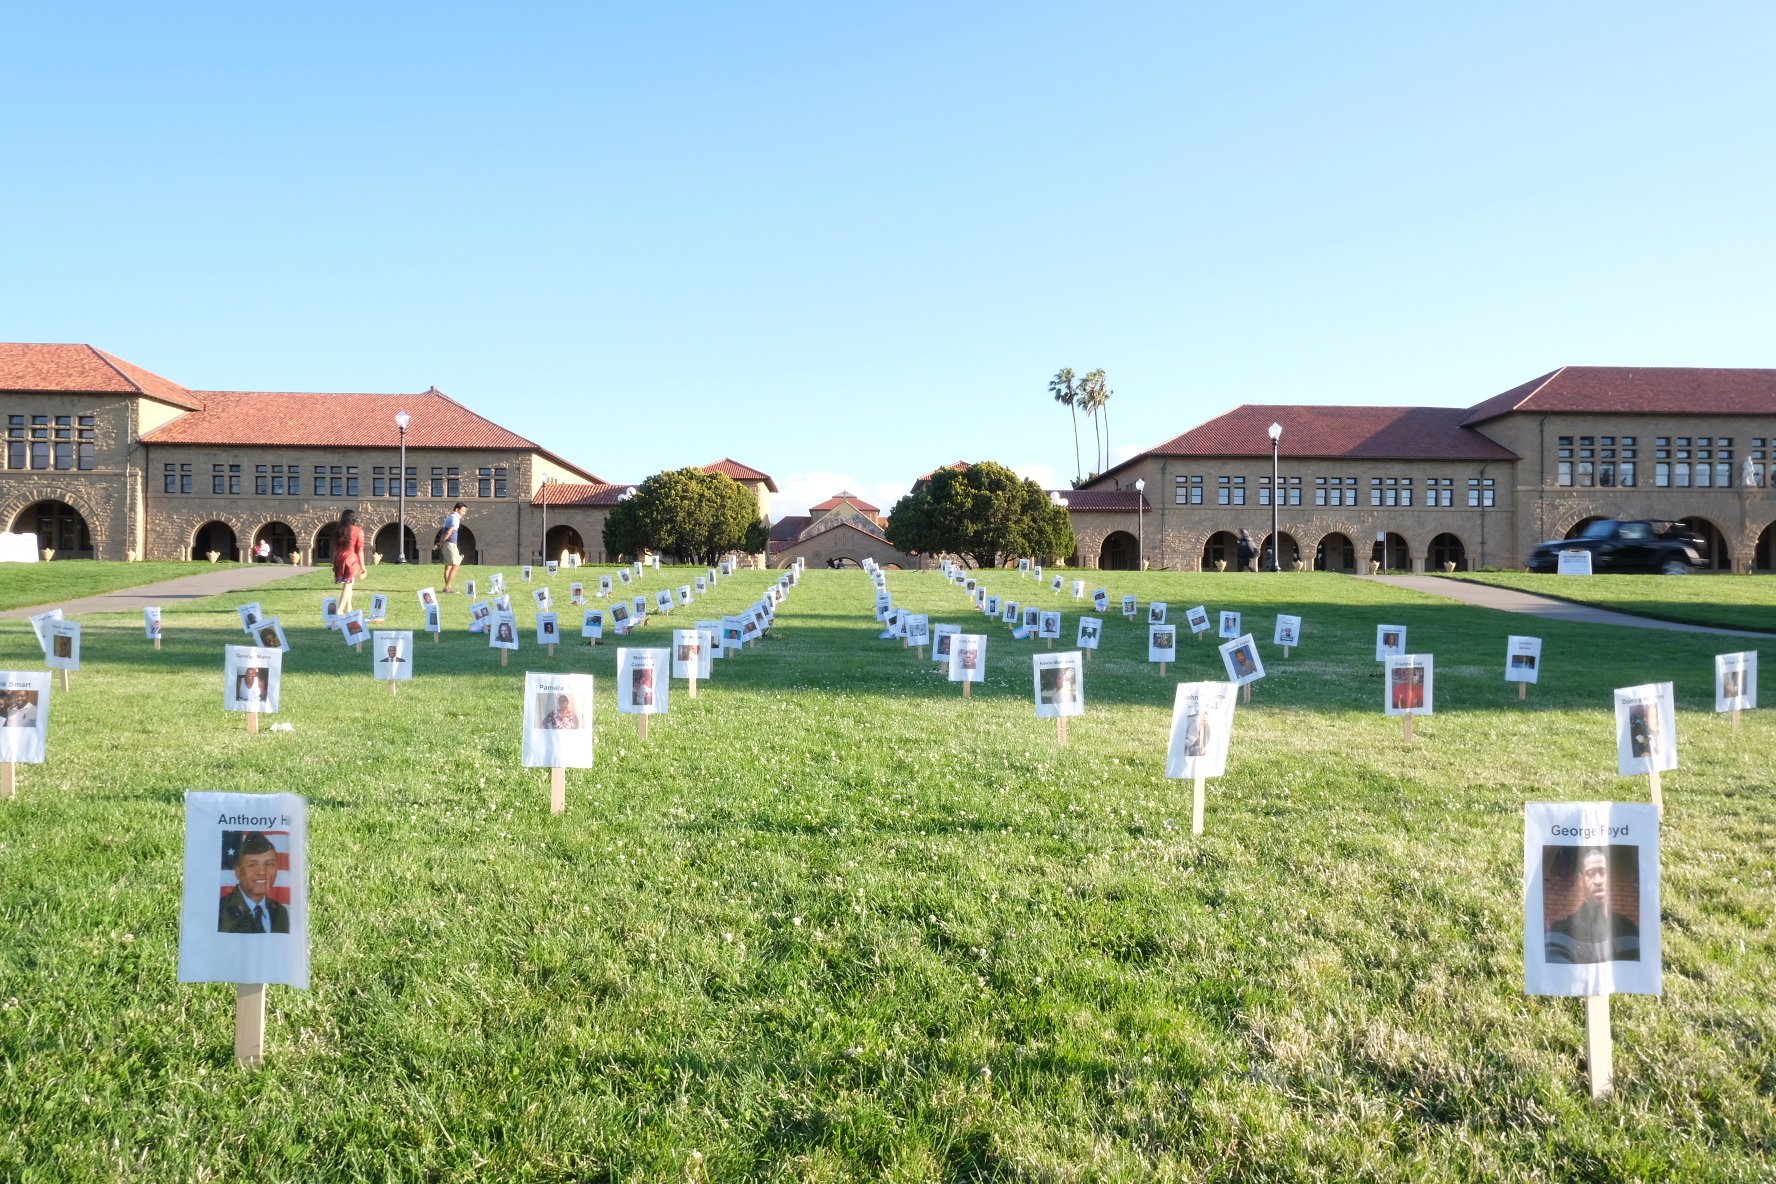 Handmade signs form neat rows across the grass of the Oval, each bearing the name and face of a Black person killed by racial violence and police brutality.